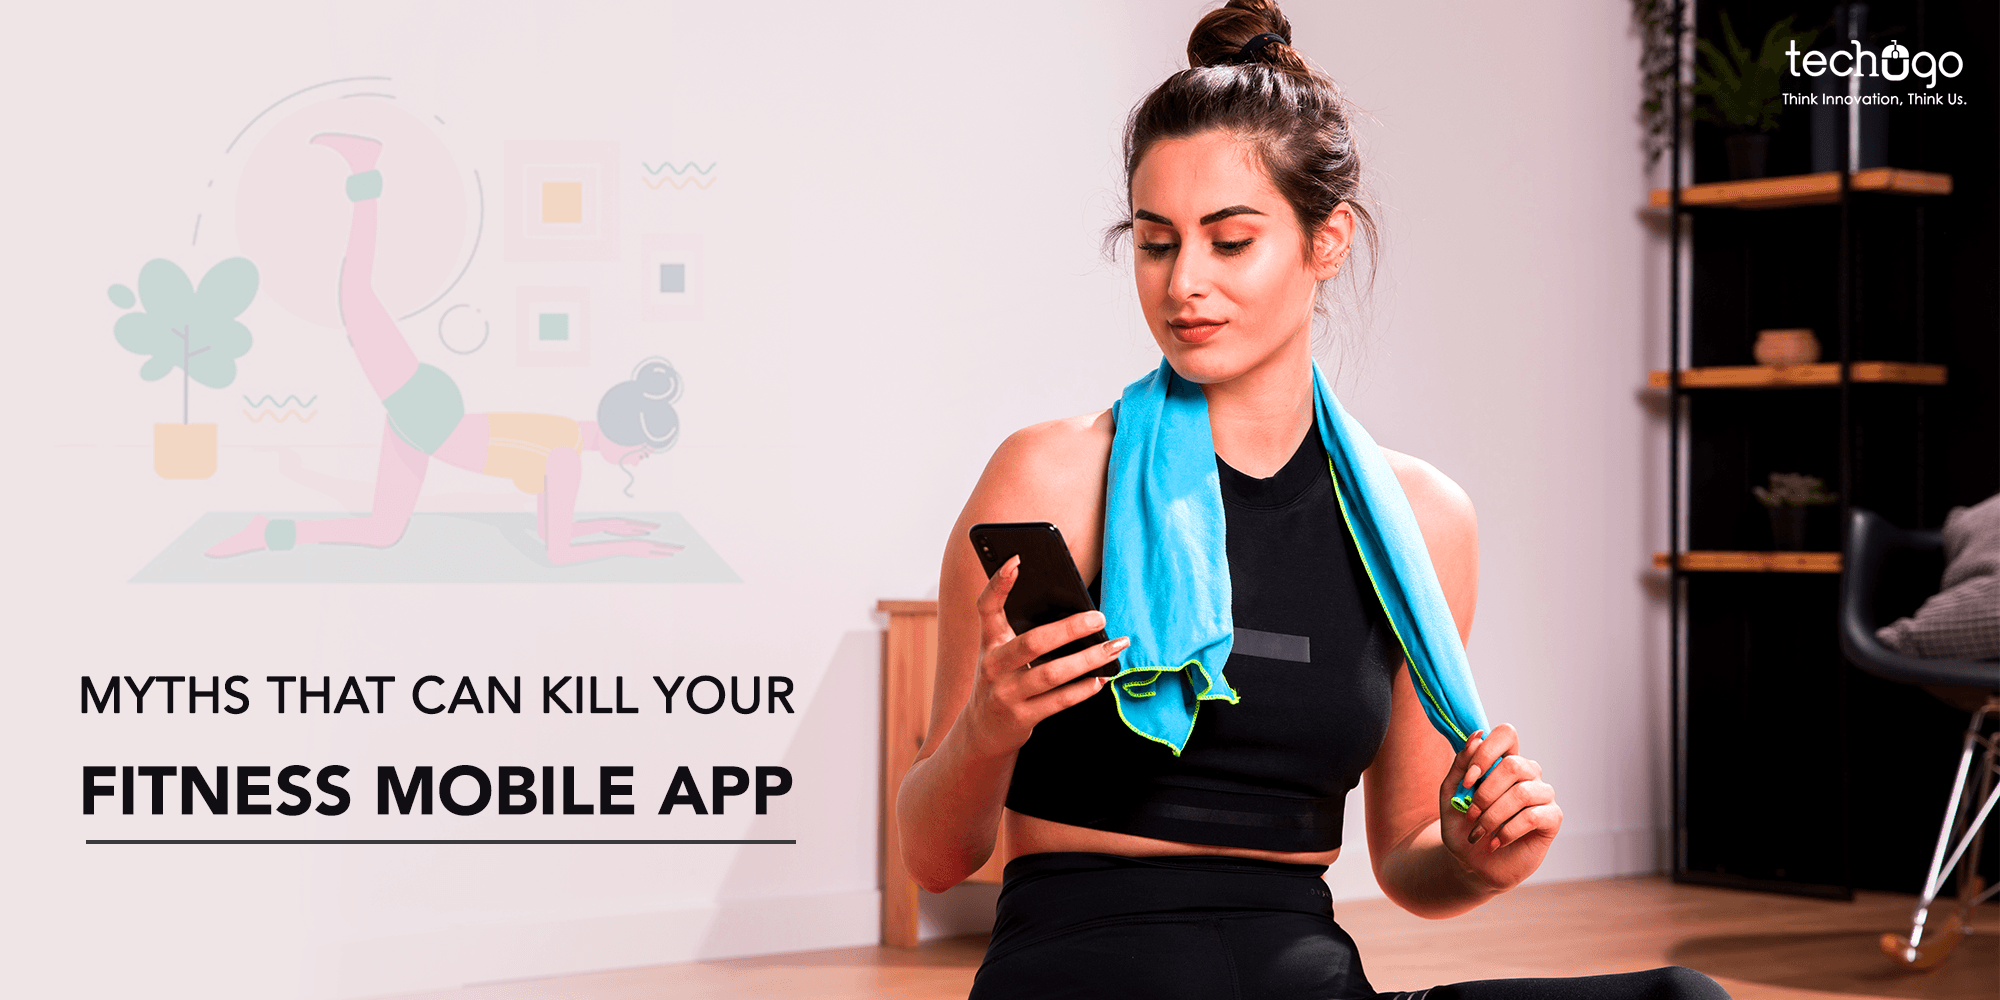 Myths That Can Kill Your Fitness Mobile App